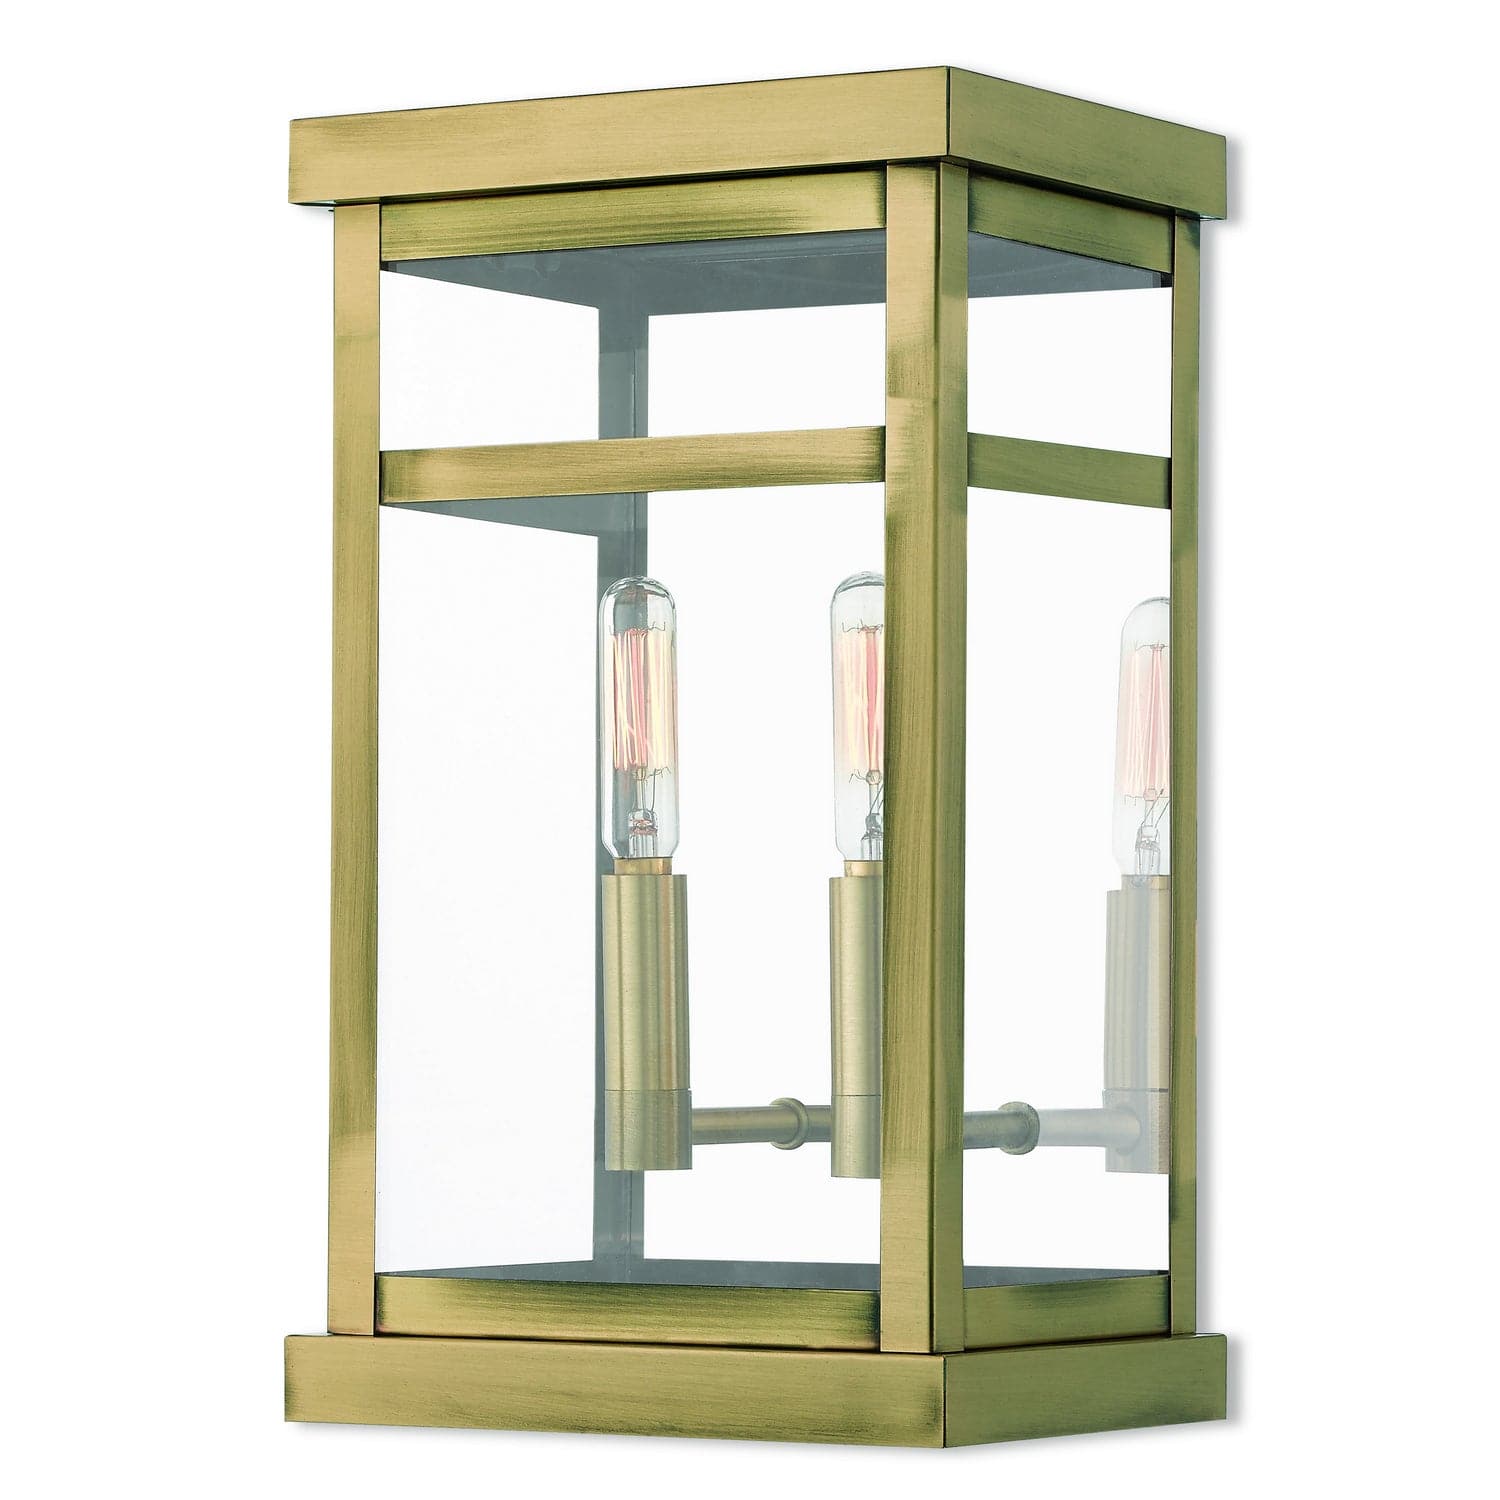 Livex Lighting - 20702-01 - Two Light Outdoor Wall Lantern - Hopewell - Antique Brass w/ Polished Chrome Stainless Steel